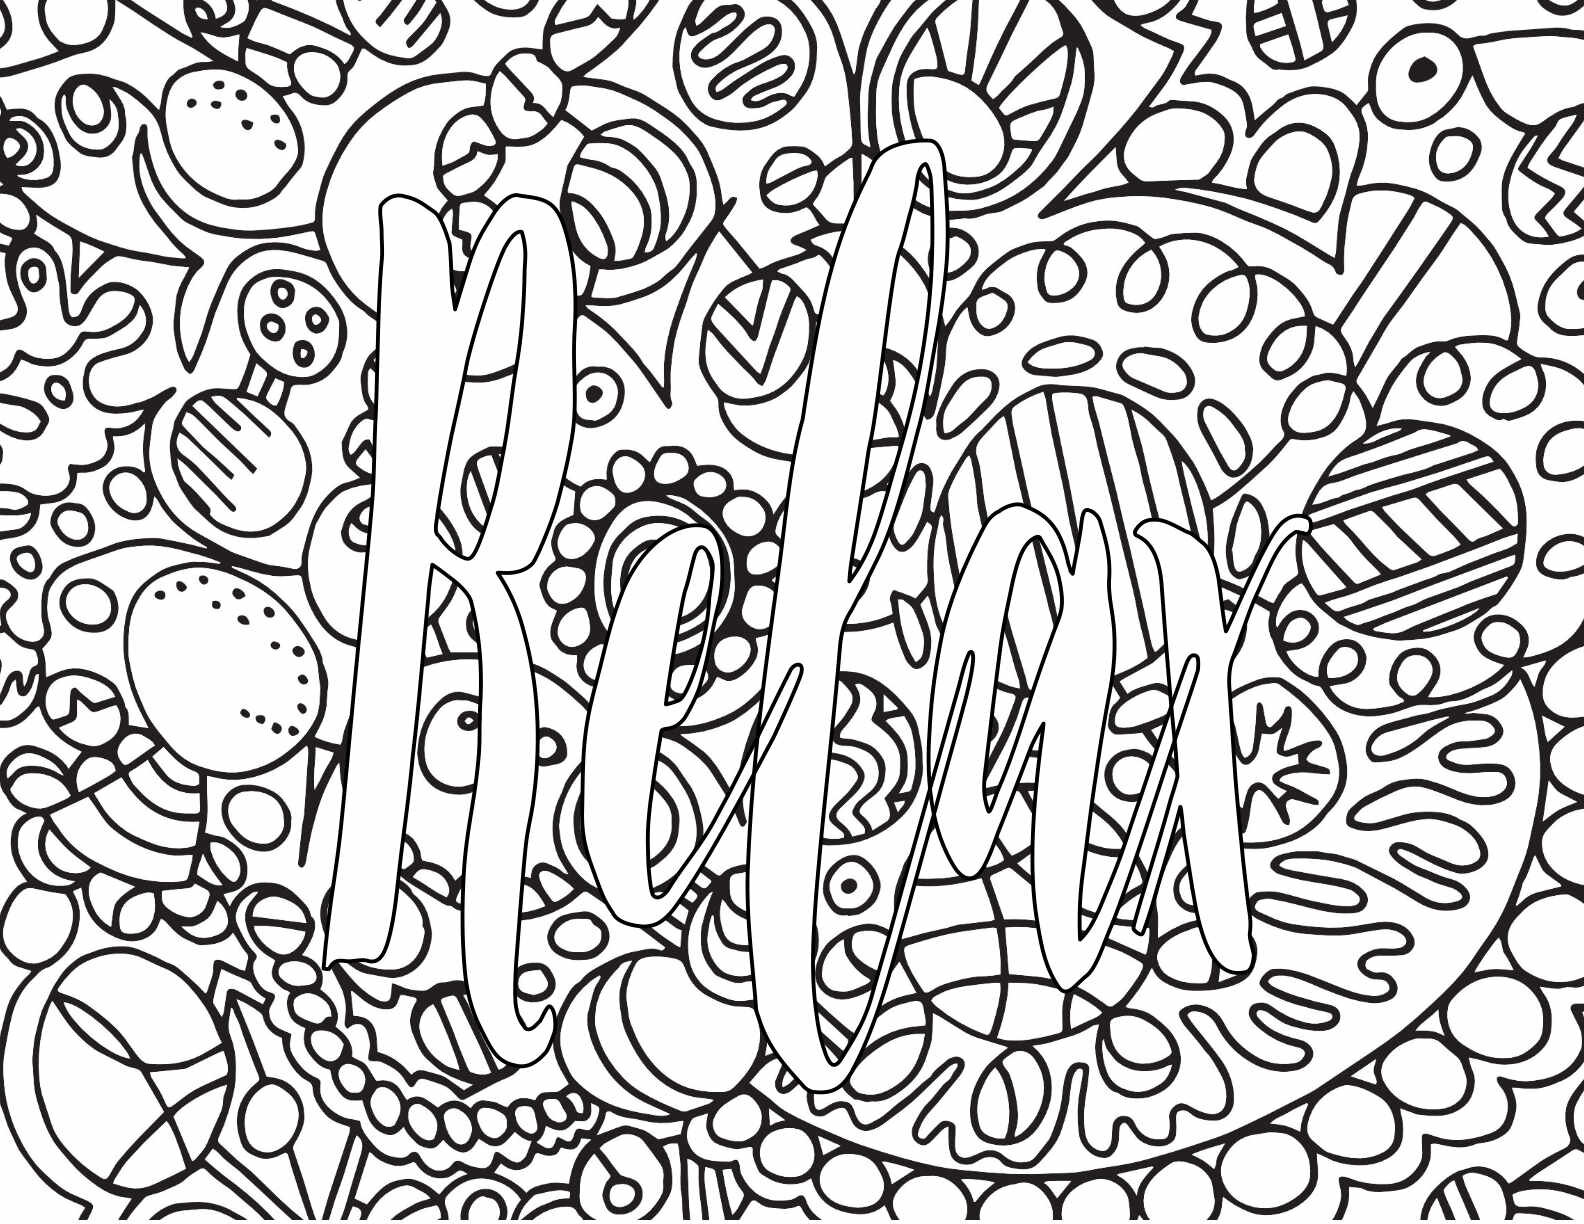 3 Free RELAX Printable Coloring PagesCLICK HERE TO DOWNLOAD THE PAGE ABOVE